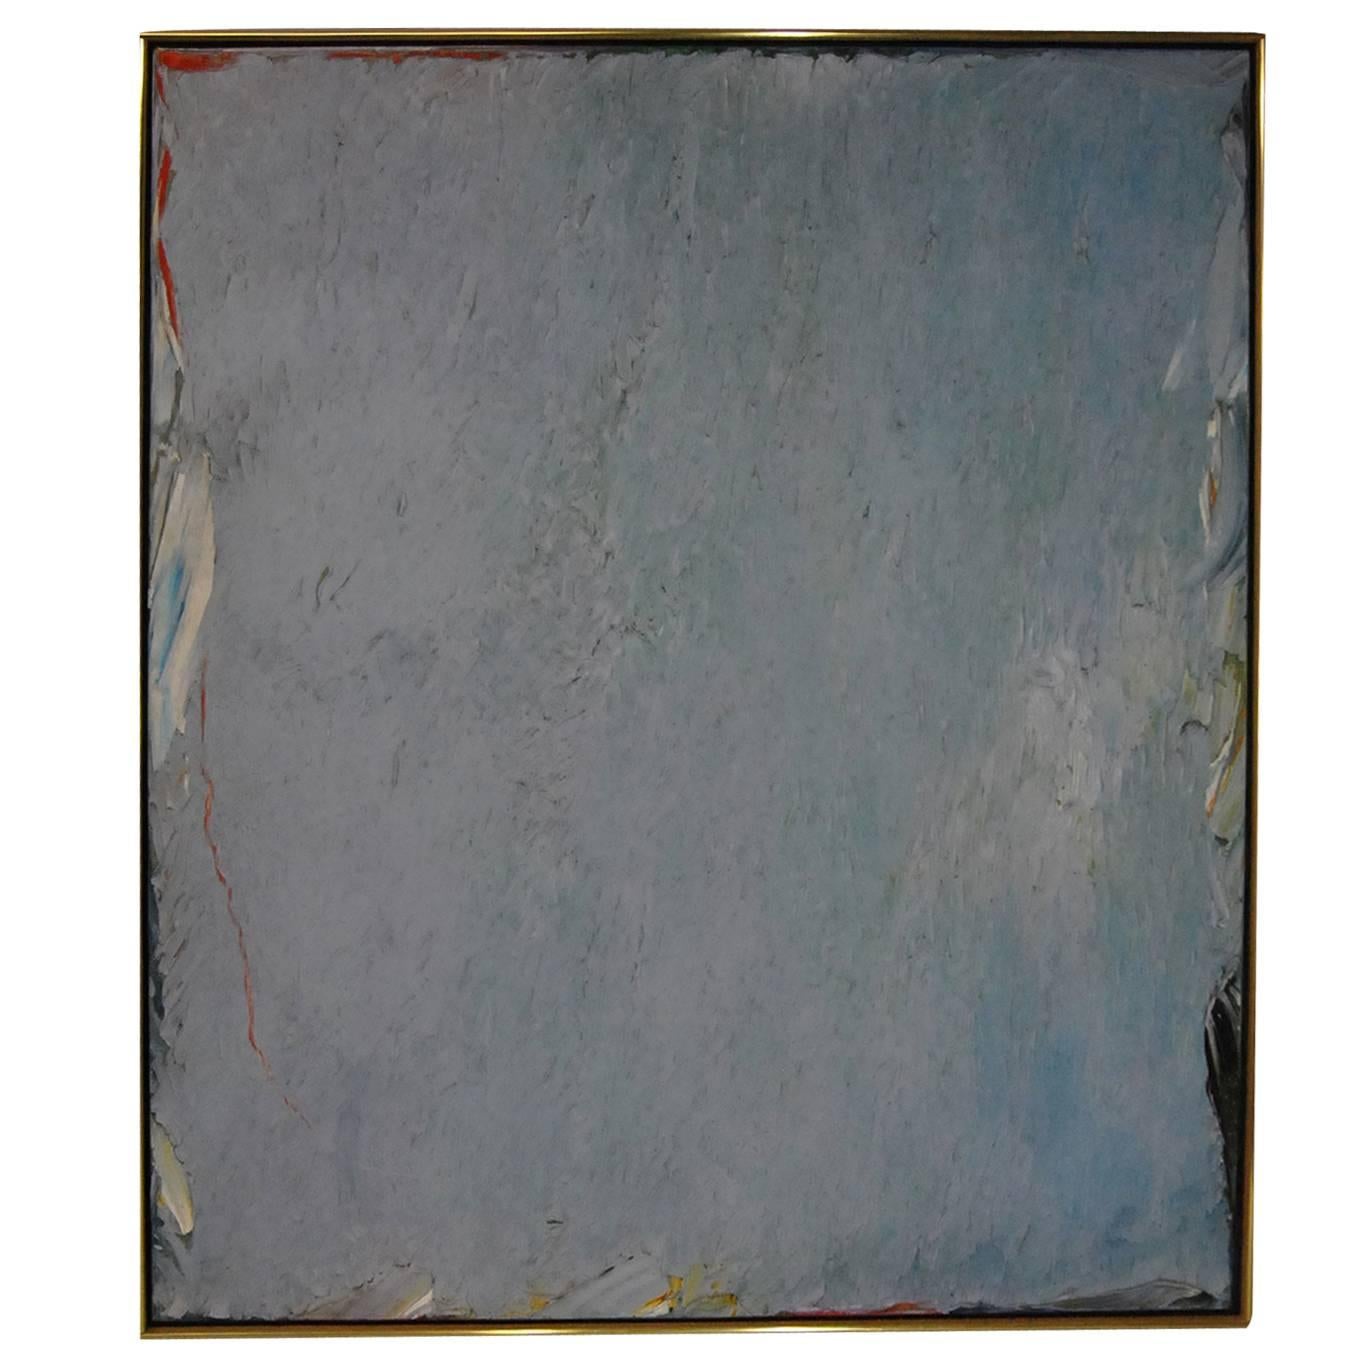 Large Abstract Painting by Stanley Boxer,  Weepedtendrilshoarsighings, 1977